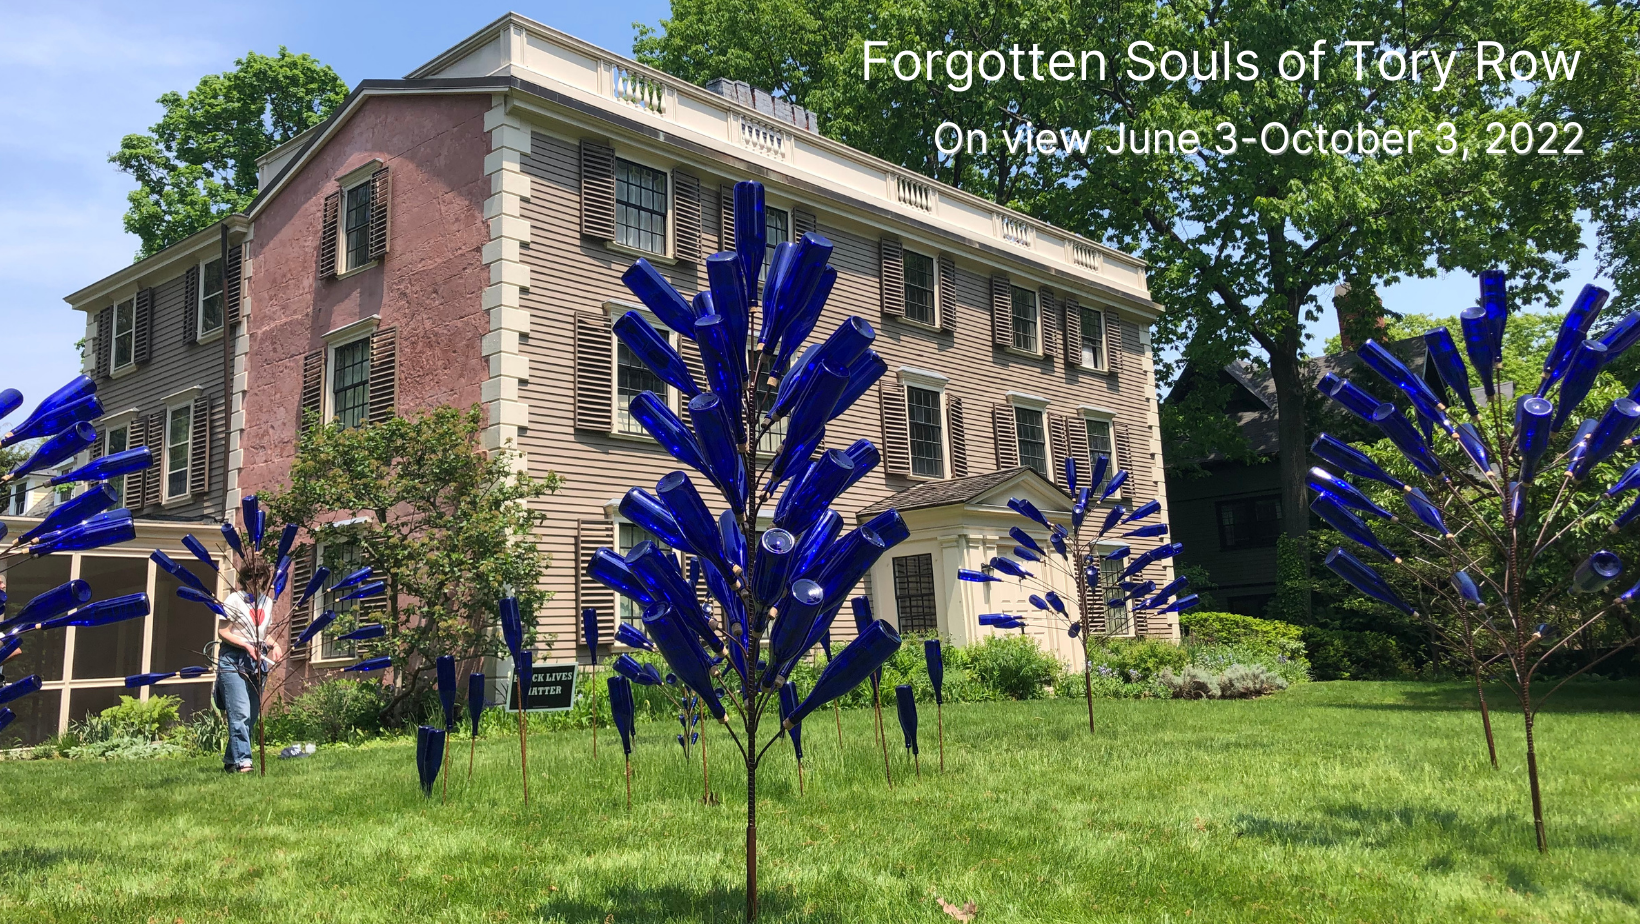 Now on view: Temporary public art installation at Hooper-Lee-Nichols House